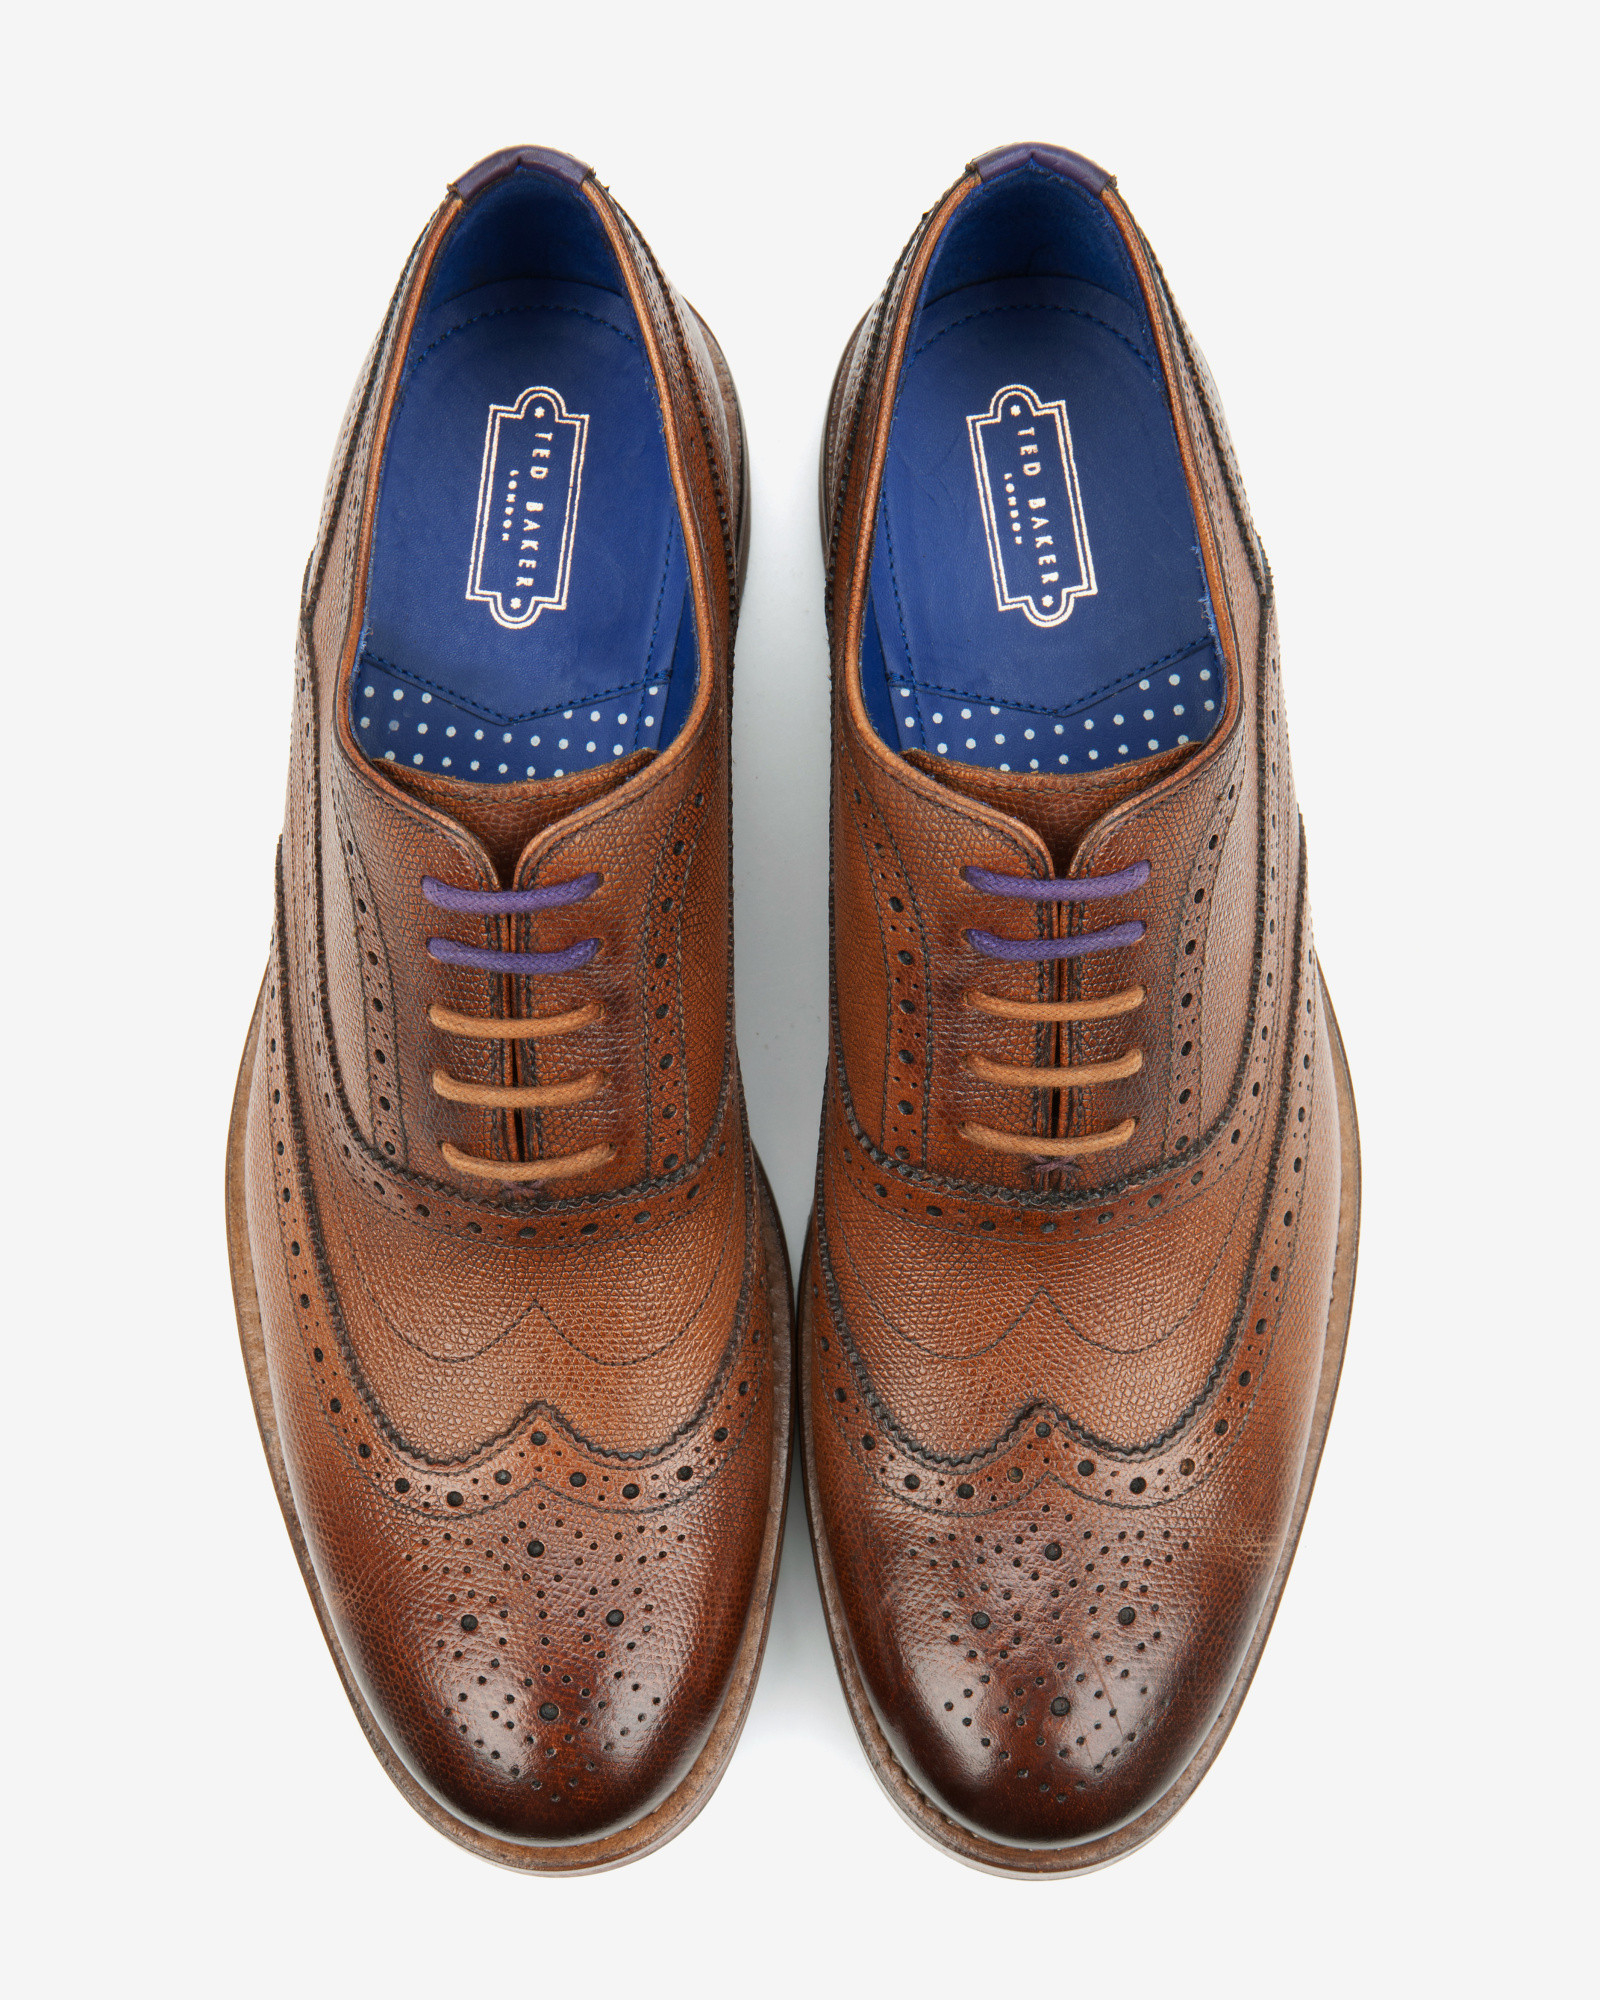 Ted Baker Leather Oxford Brogues in Brown for Men - Lyst